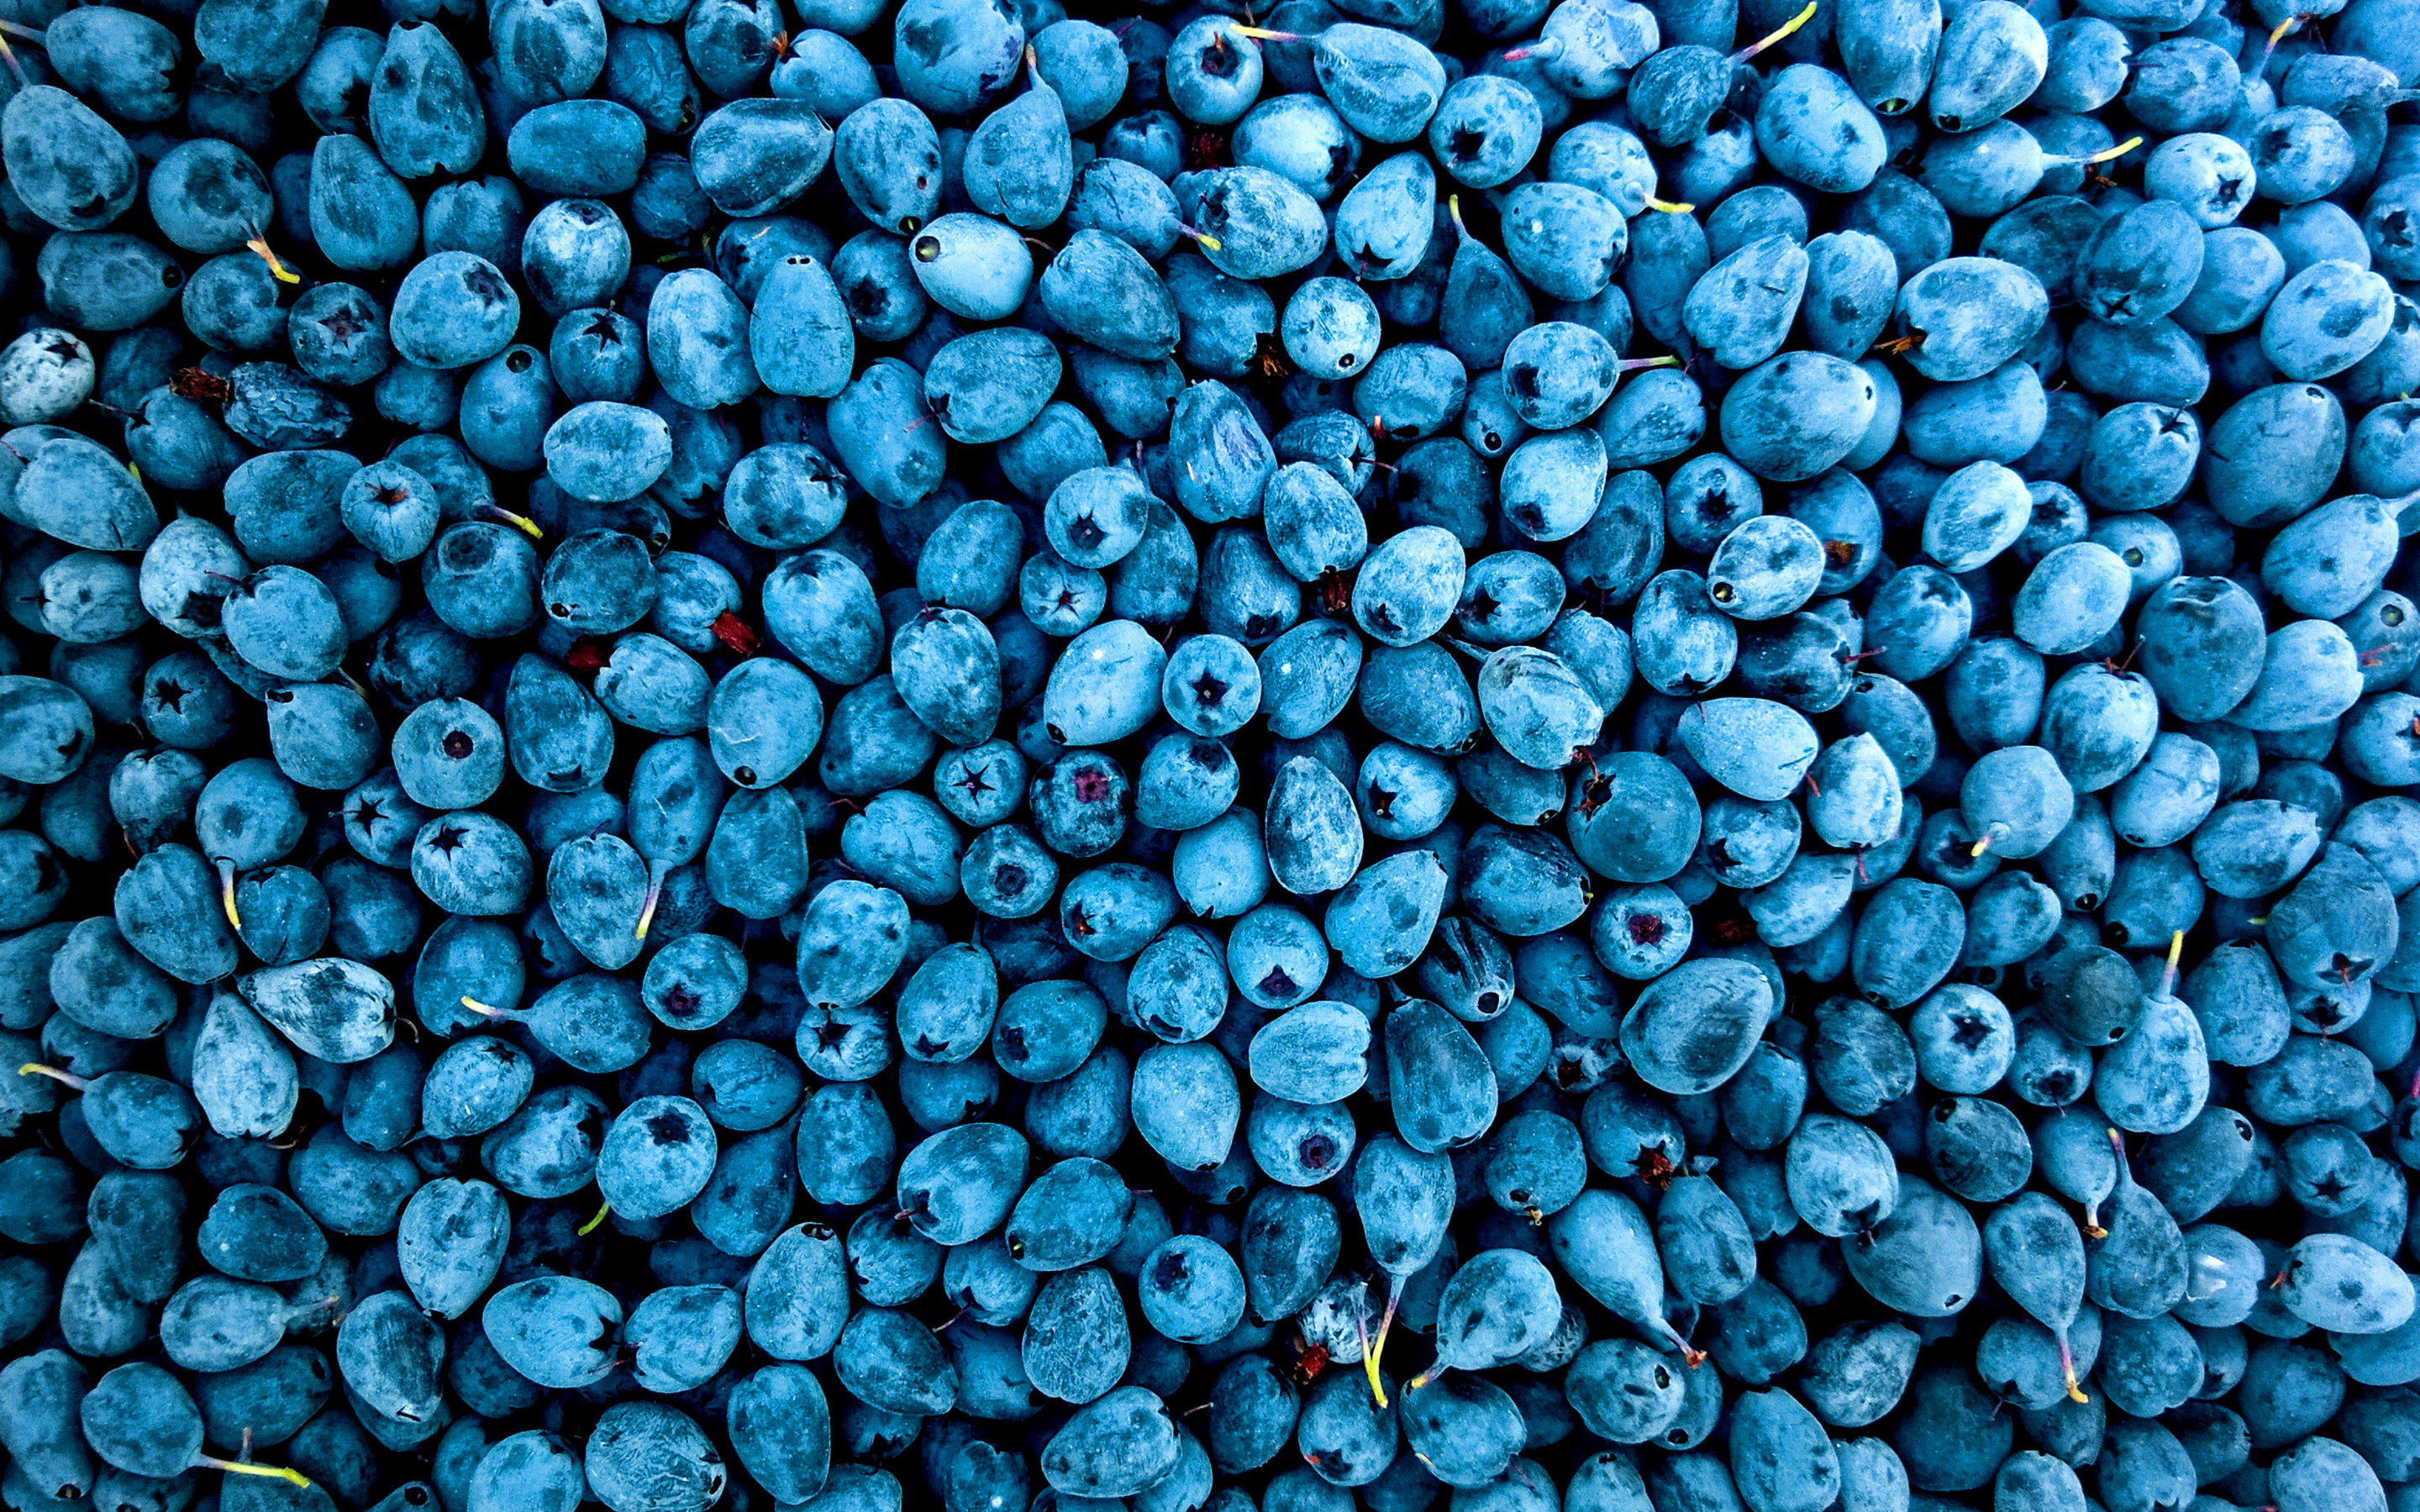 Download Wallpaper Blueberries, Close Up, Berries, Food Textures, Fresh Fruits, Background With Blueberries, Blue Background For Desktop With Resolution 2880x1800. High Quality HD Picture Wallpaper